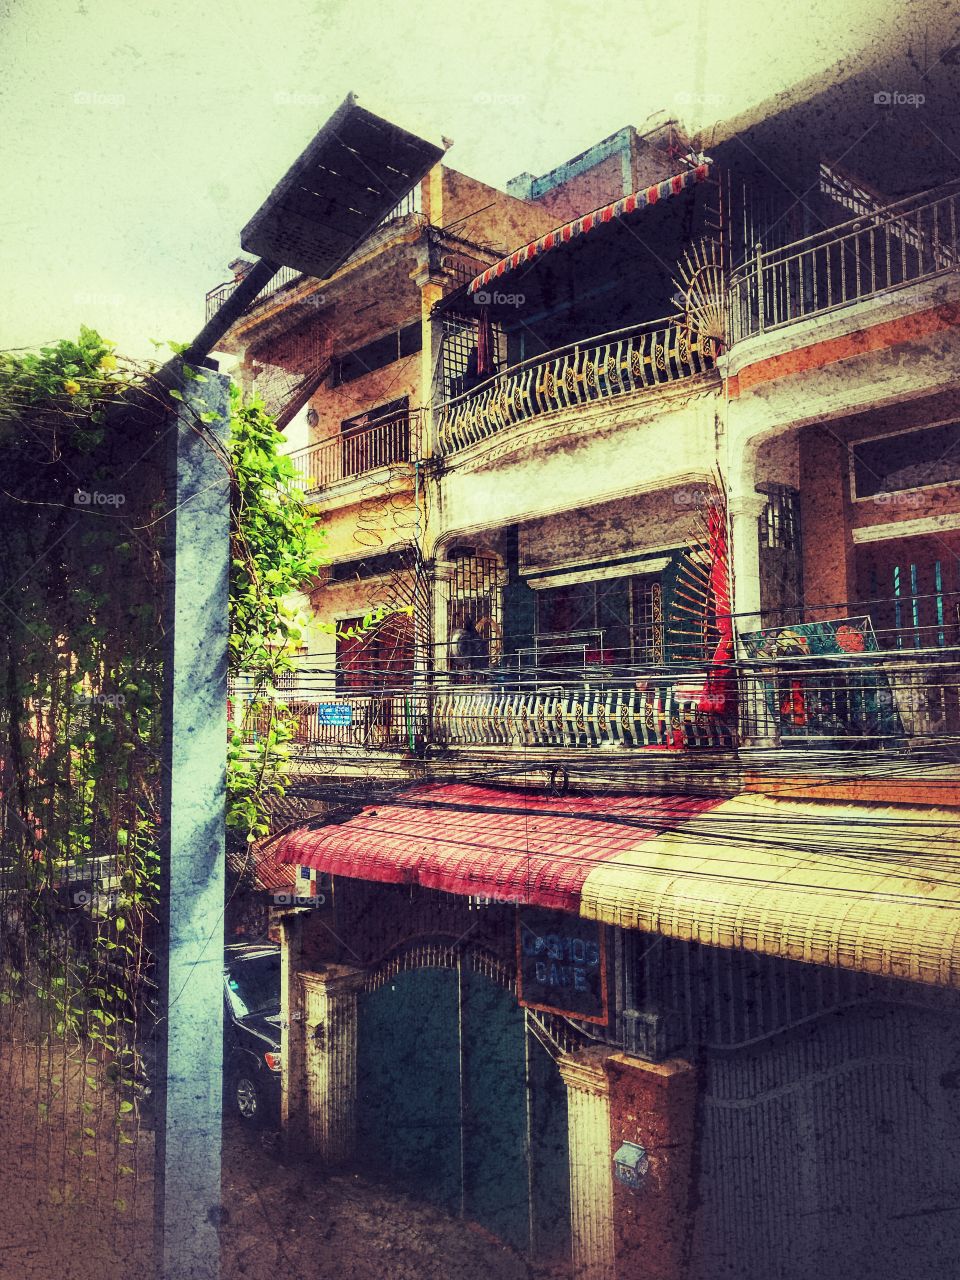 Morning In Phnom Penh... the bright sunlight over the old quarter of the city.  The colorful terraces glow